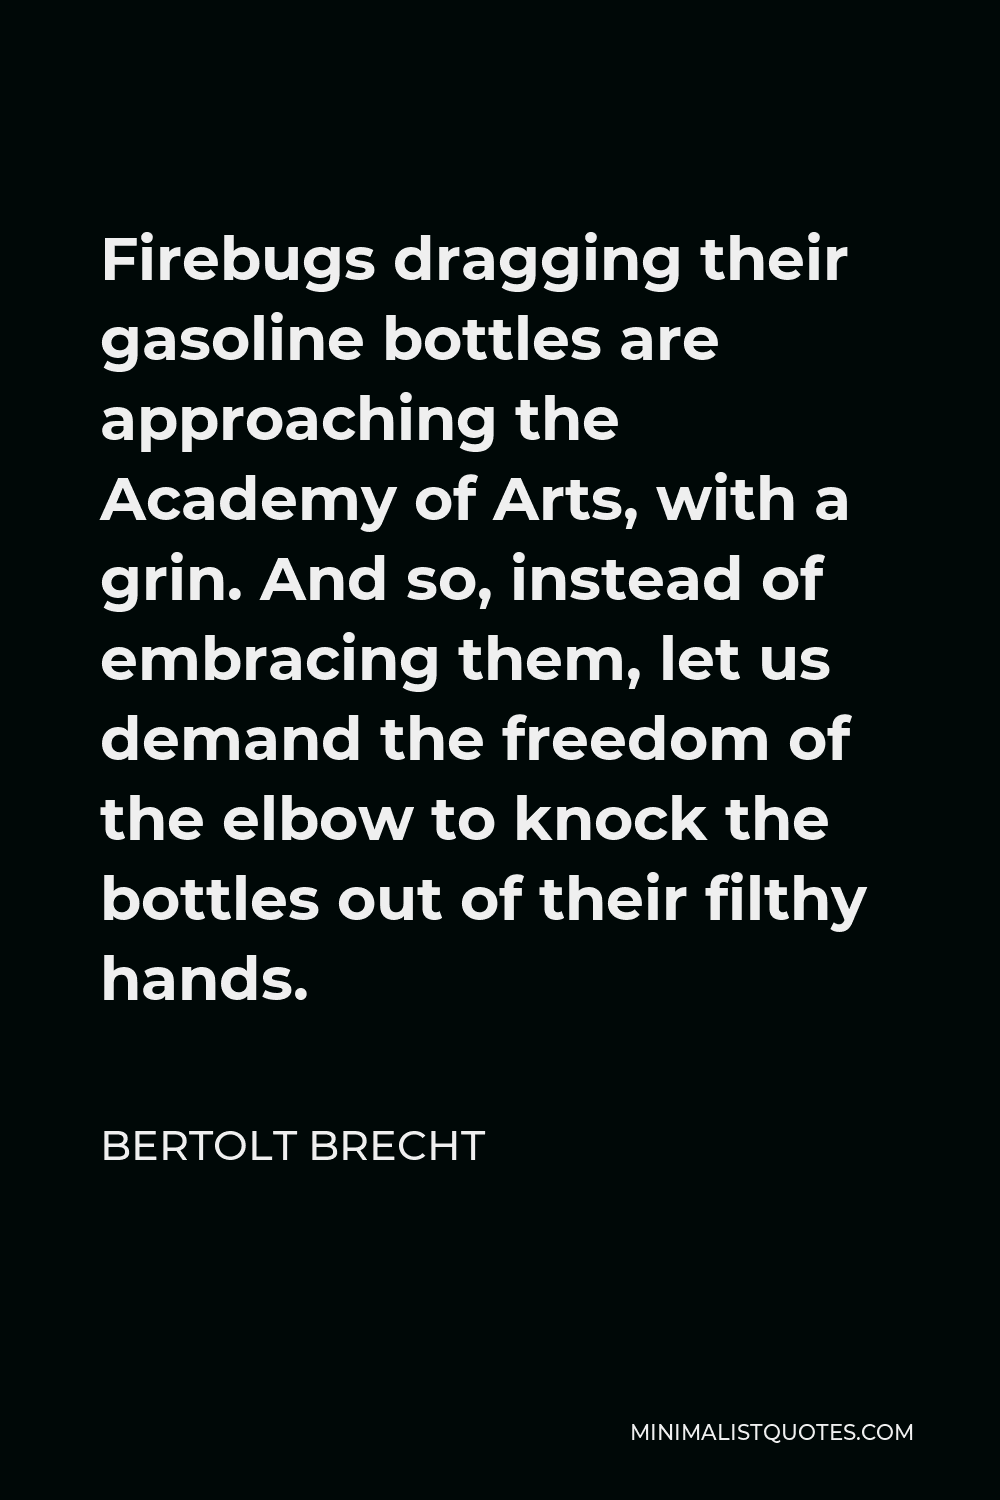 Bertolt Brecht Quote - Firebugs dragging their gasoline bottles are approaching the Academy of Arts, with a grin. And so, instead of embracing them, let us demand the freedom of the elbow to knock the bottles out of their filthy hands.